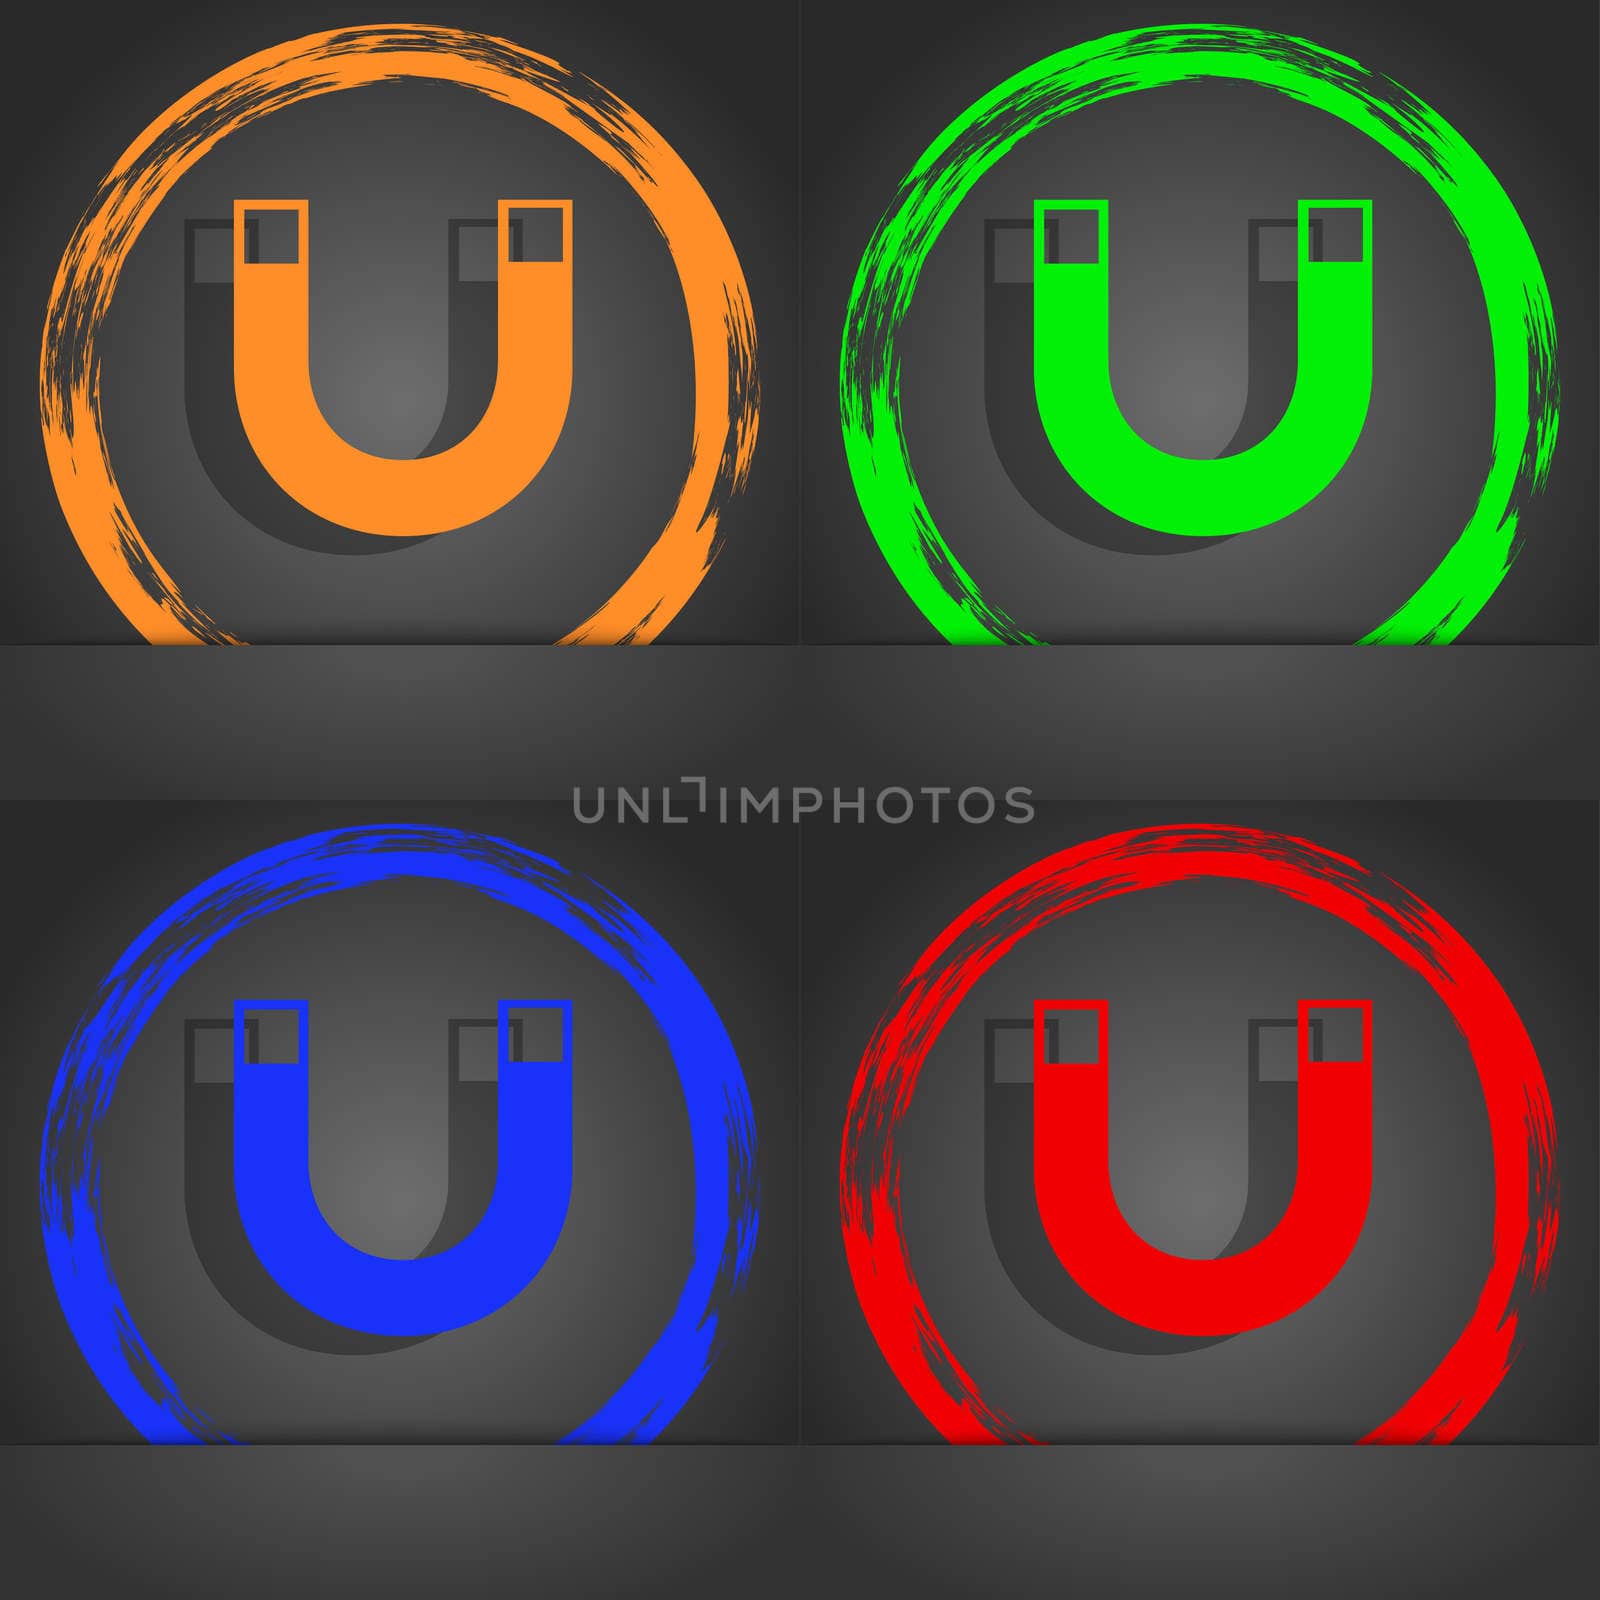 magnet sign icon. horseshoe it symbol. Repair sig. Fashionable modern style. In the orange, green, blue, red design.  by serhii_lohvyniuk